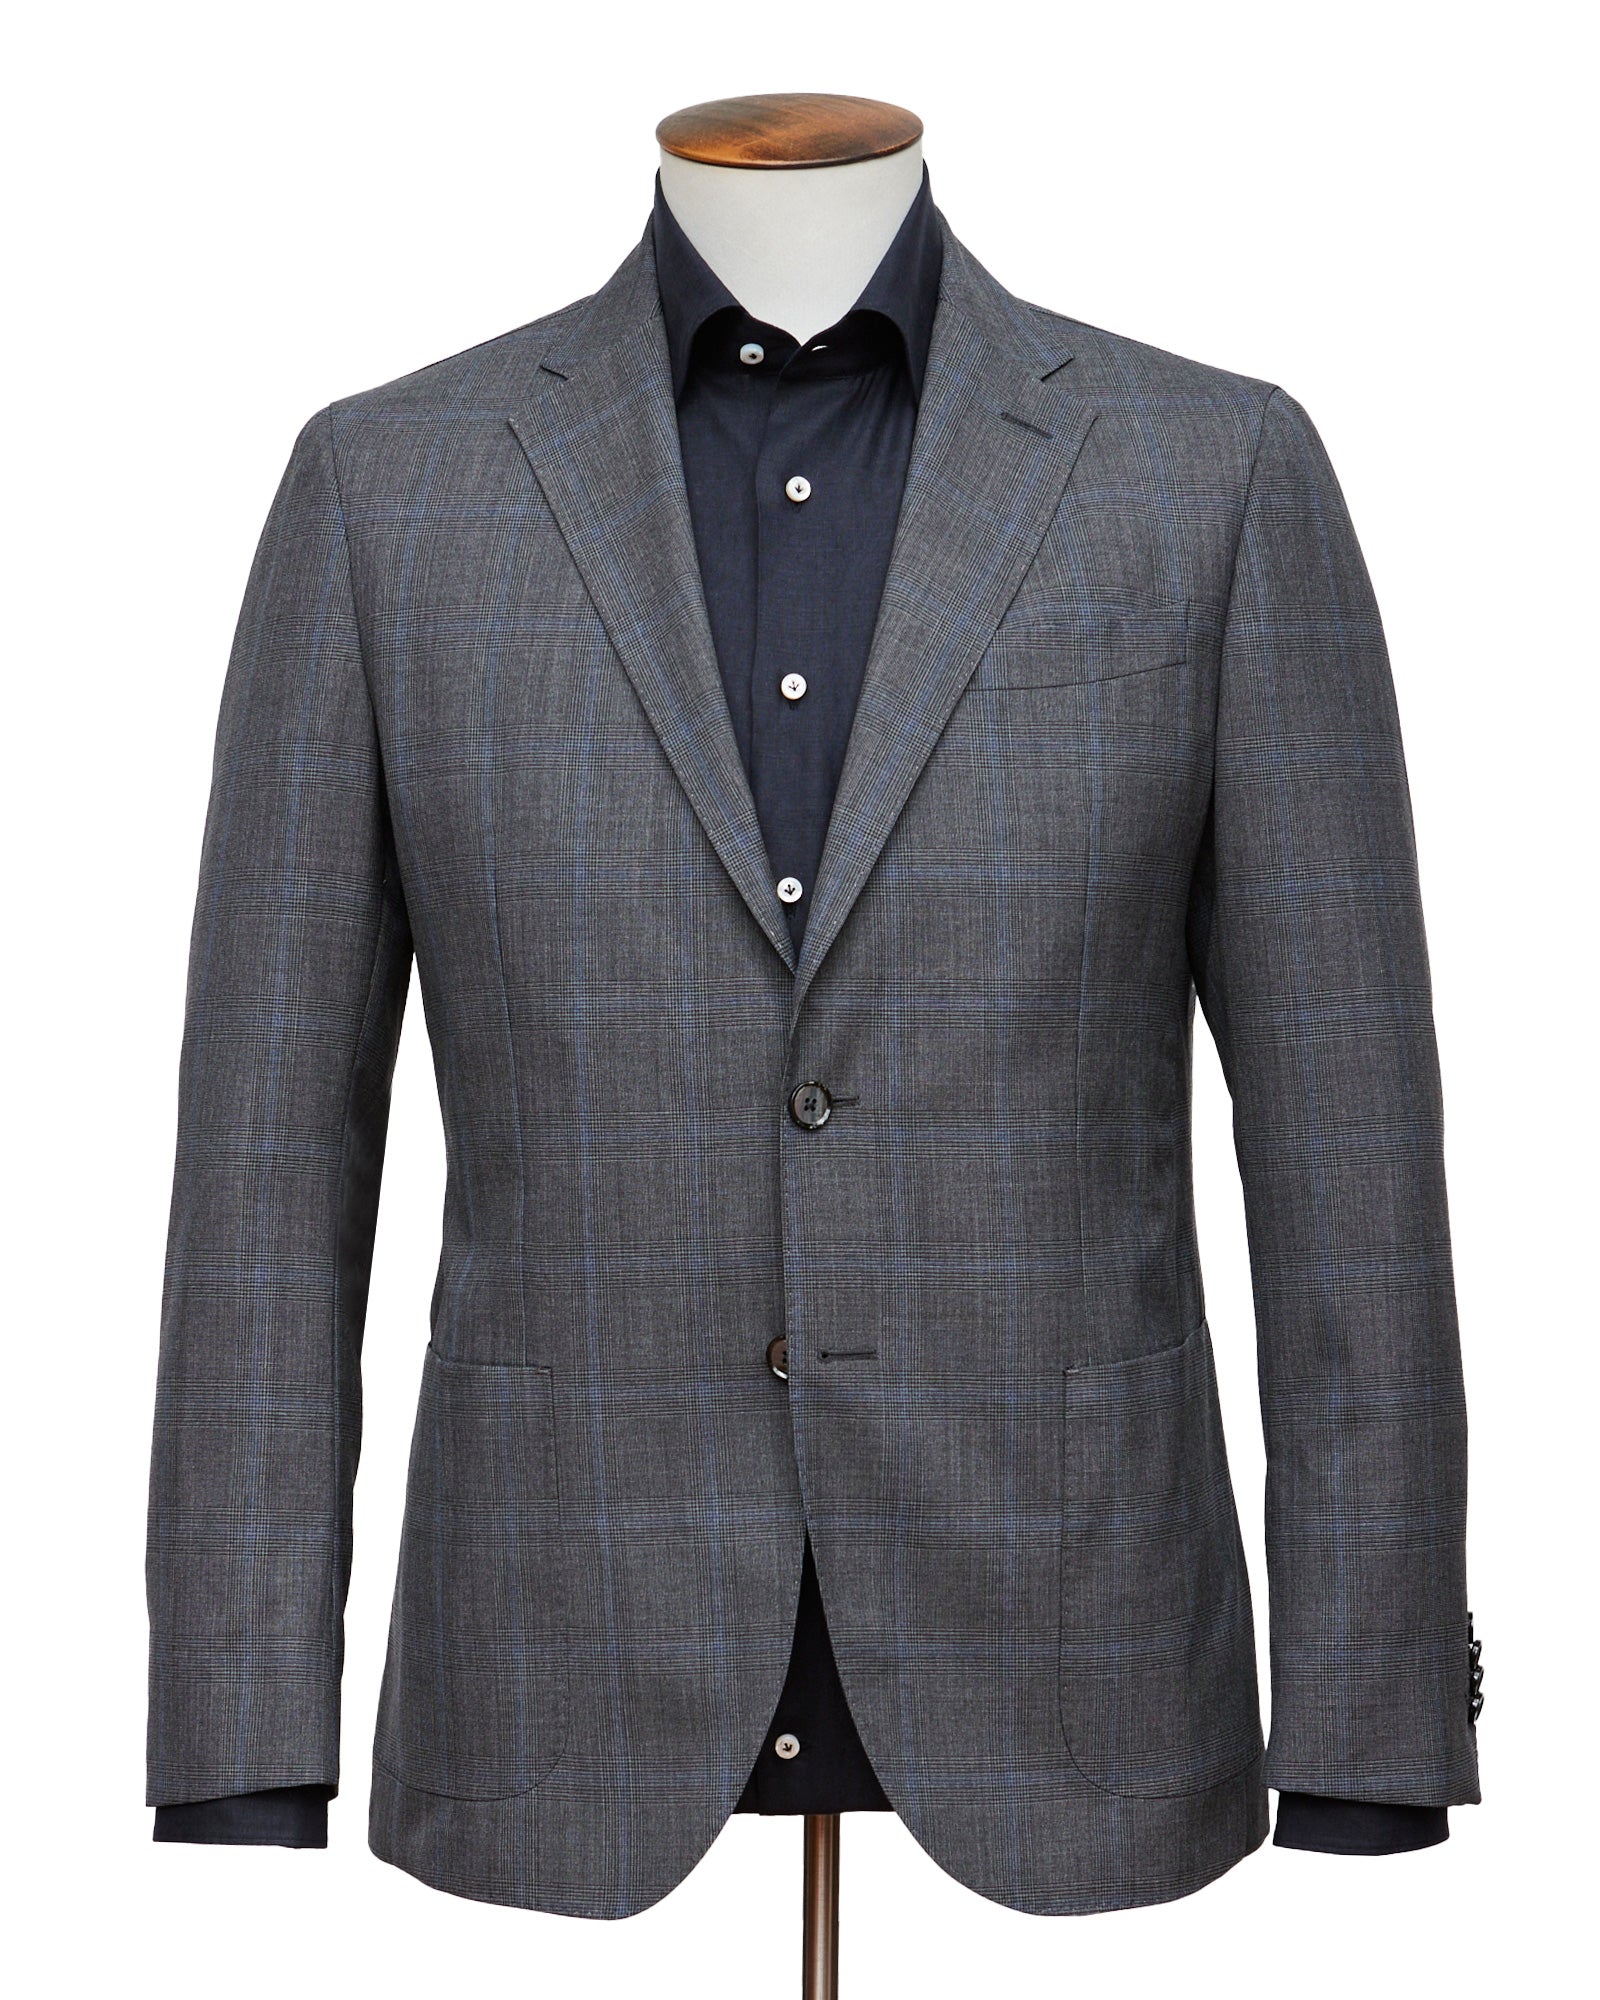 Charcoal Glen Check Wool Suit